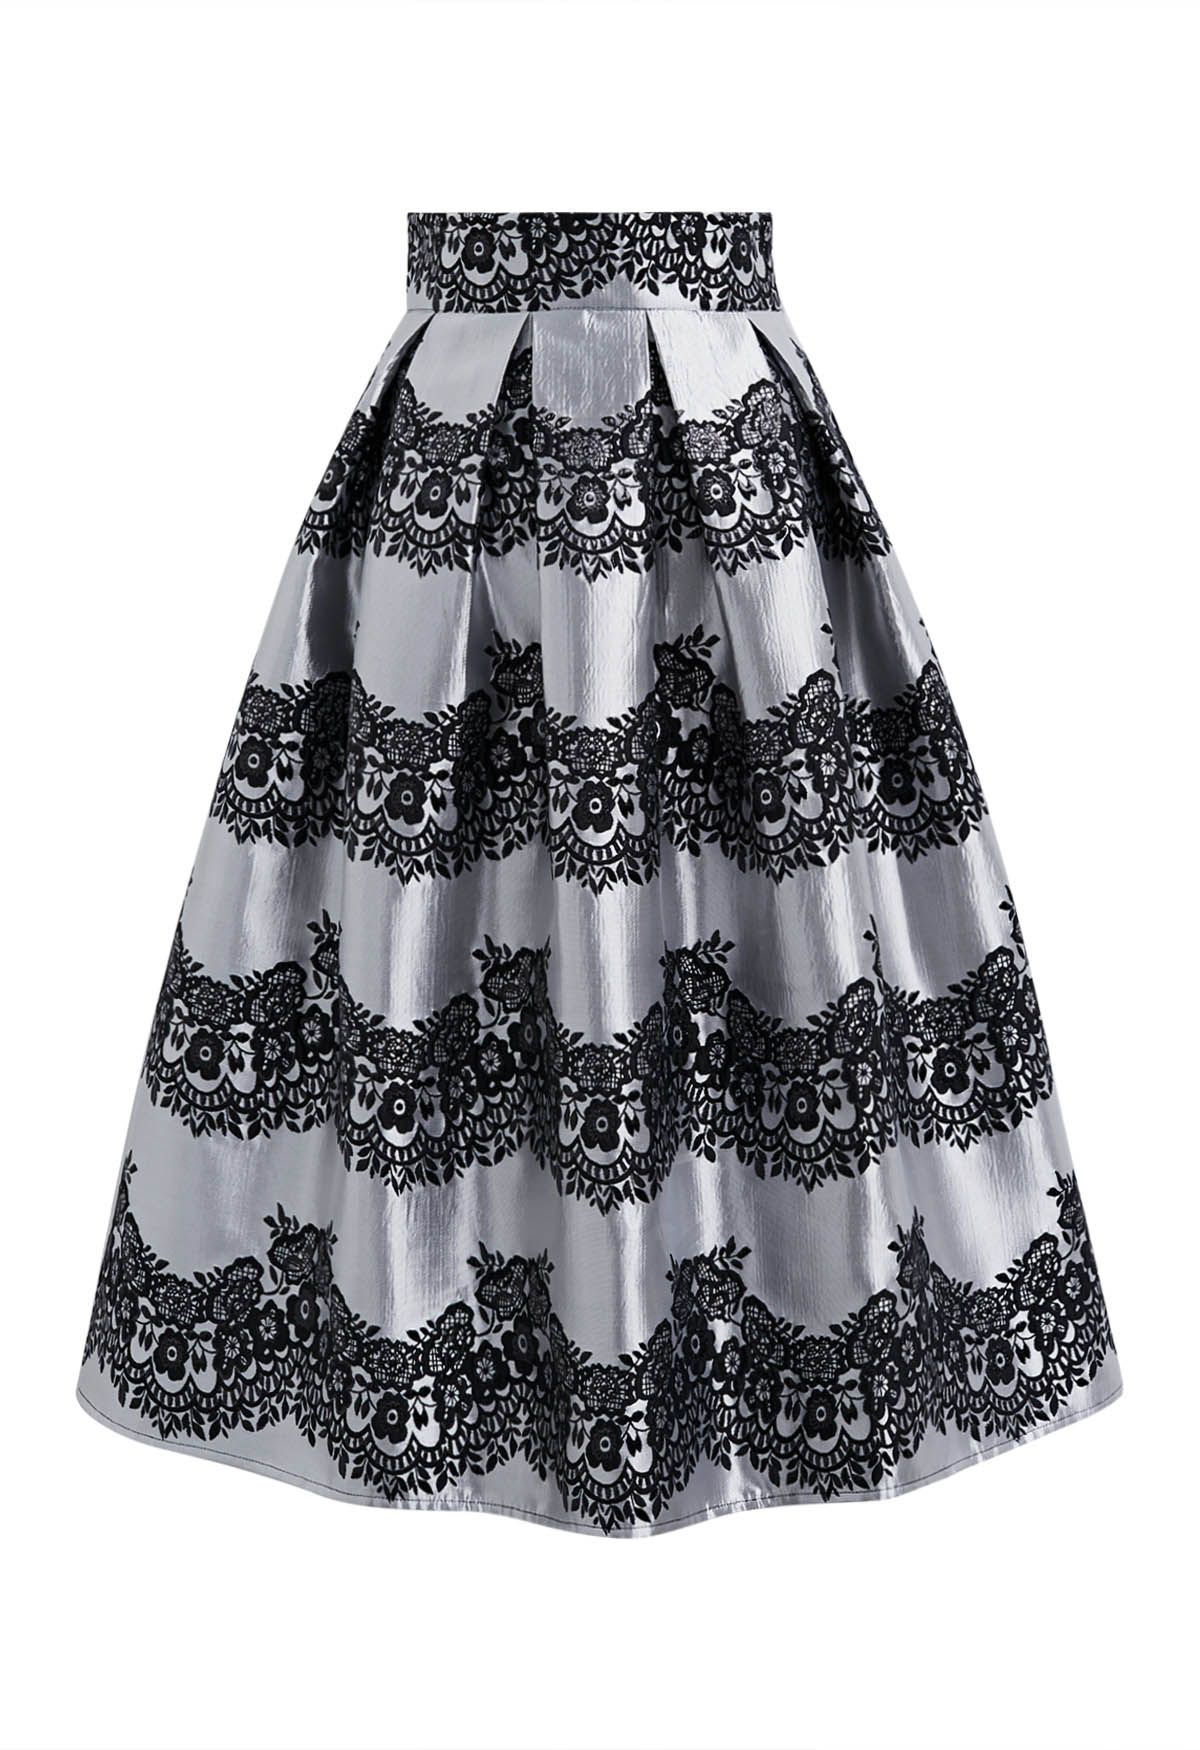 Magnificent Floral Jacquard Pleated Midi Skirt in Black